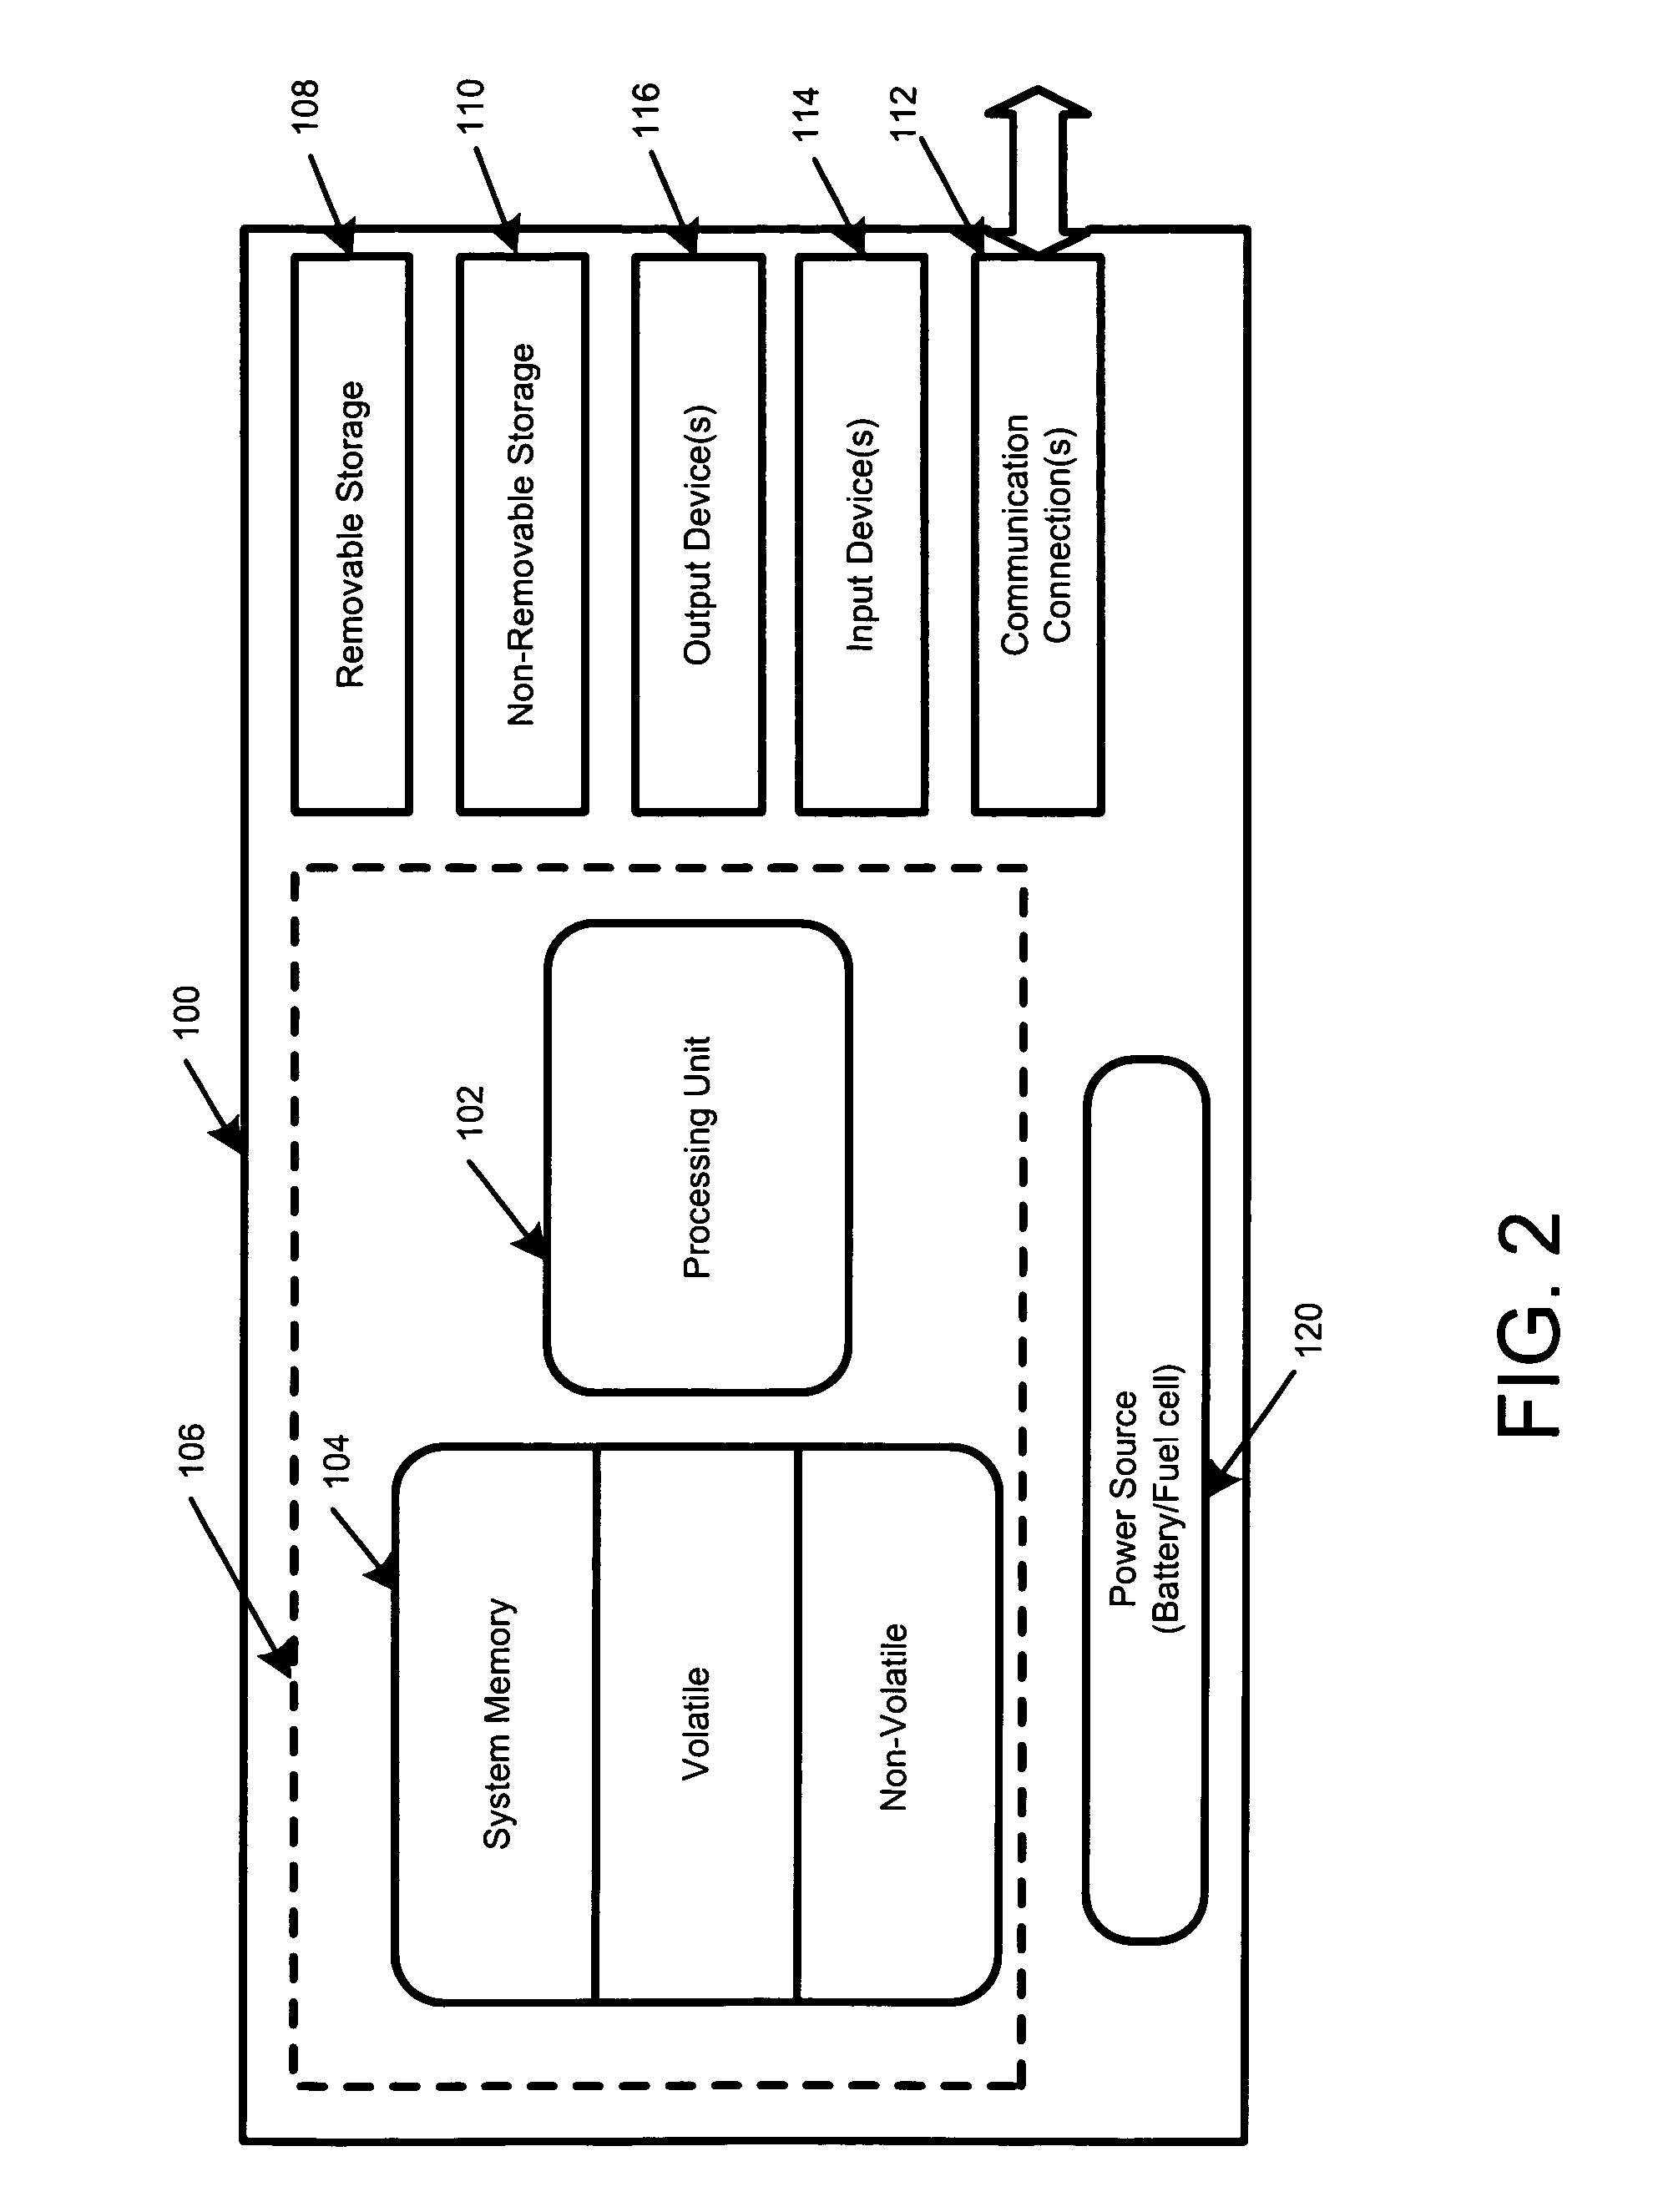 Method and apparatus for performing wireless diagnsotics and troubleshooting